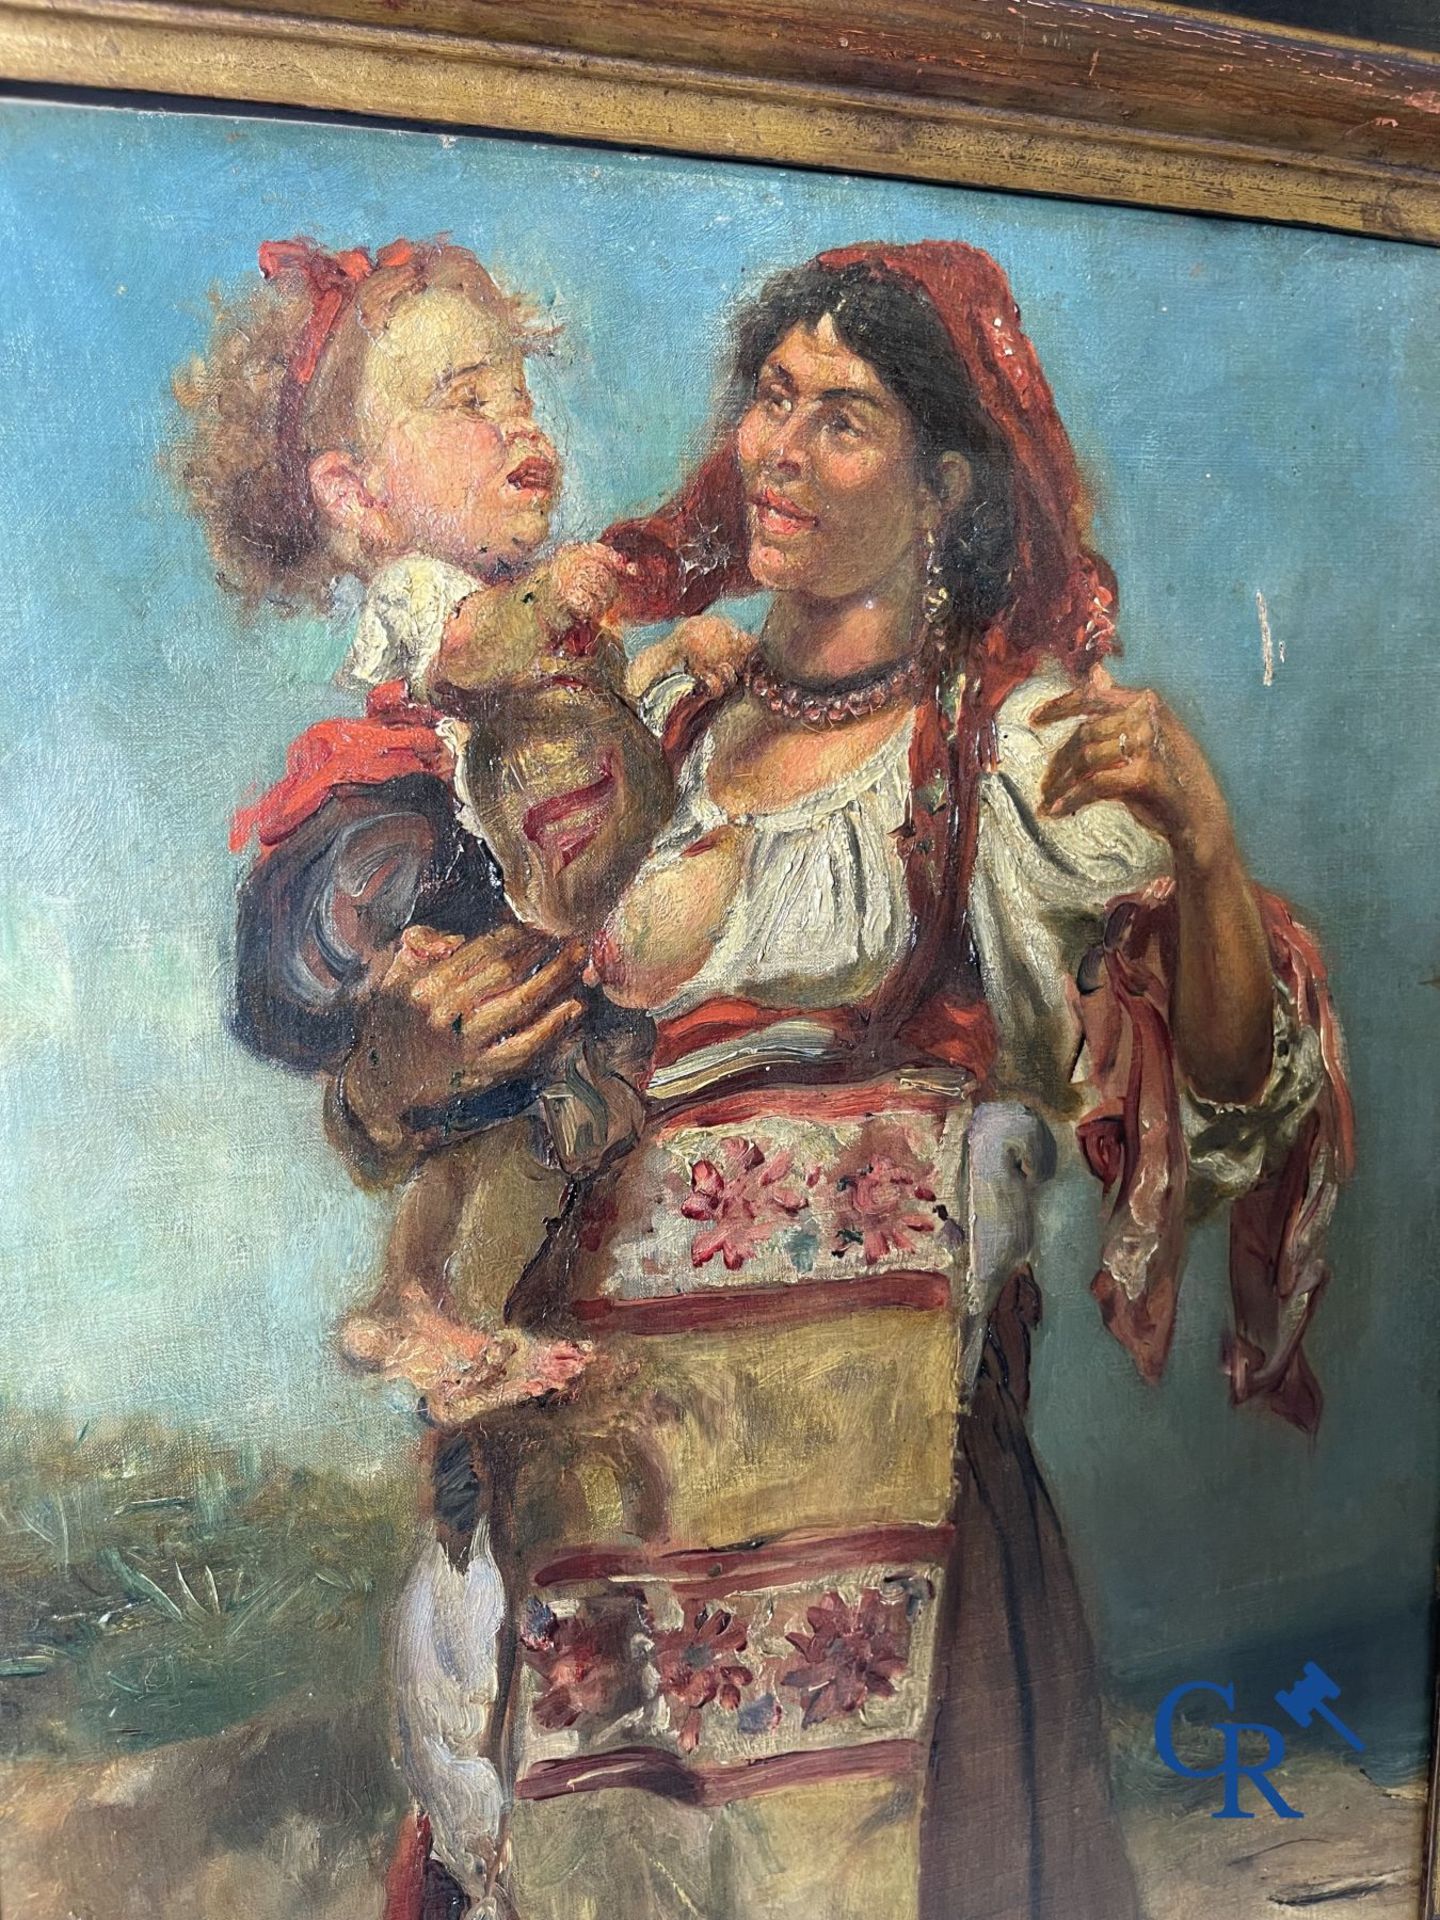 Painting: oil on canvas, illegibly signed. Gypsy woman with child. - Image 3 of 7